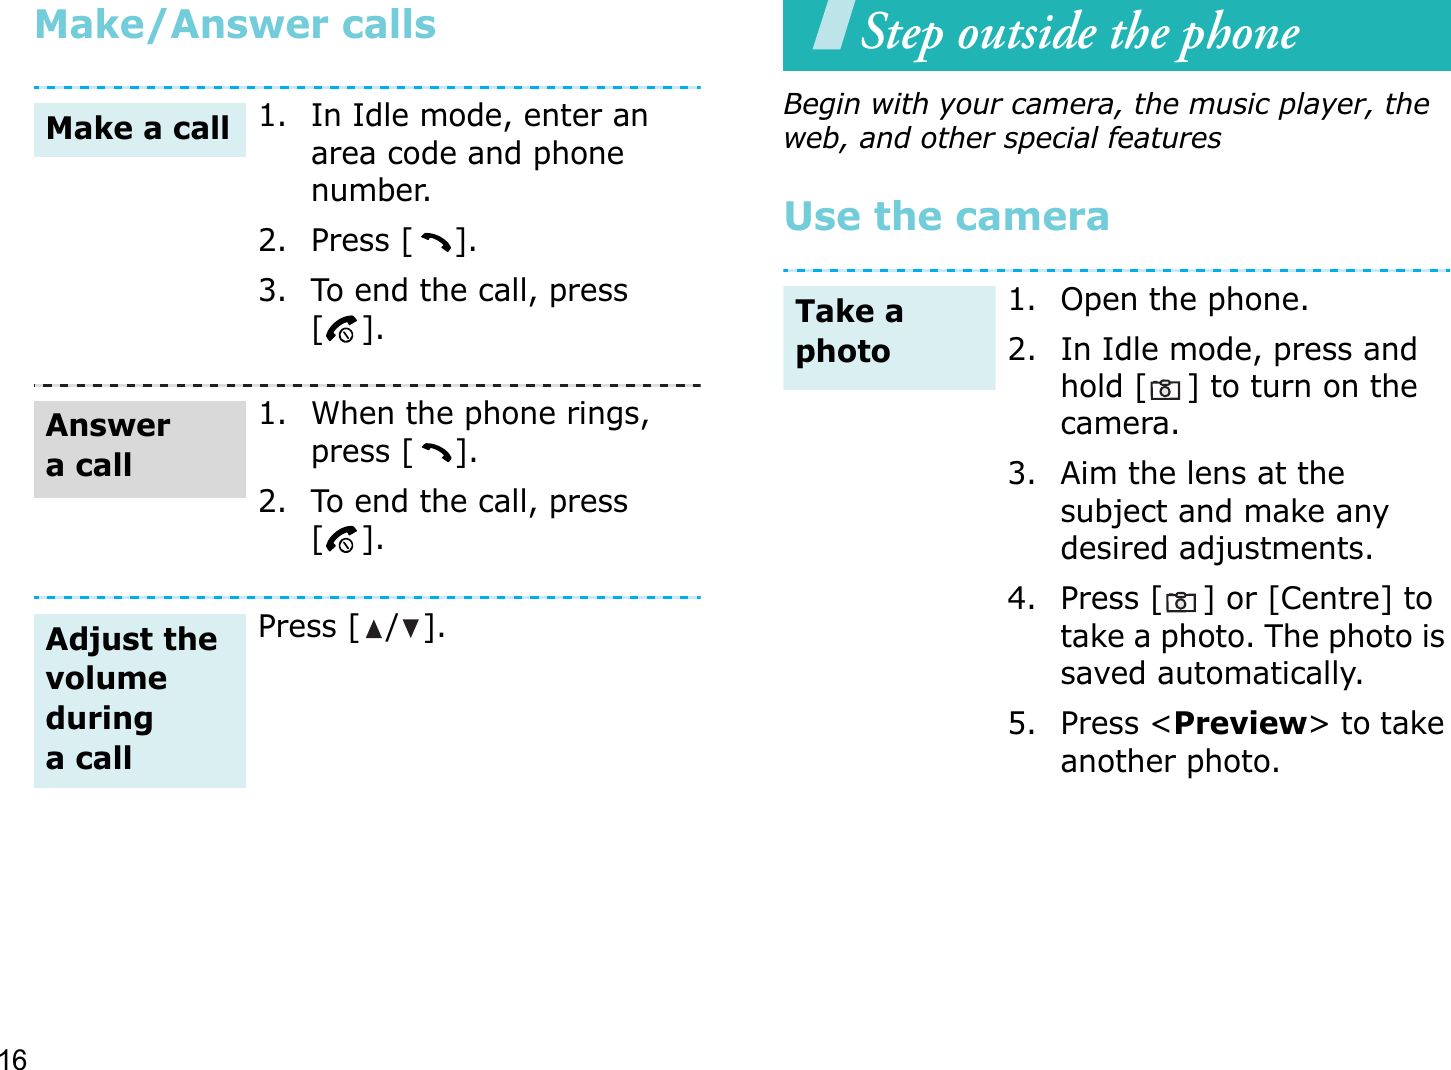 16Make/Answer callsStep outside the phoneBegin with your camera, the music player, the web, and other special featuresUse the camera1. In Idle mode, enter an area code and phone number.2. Press [ ].3. To end the call, press [].1. When the phone rings, press [ ].2. To end the call, press [].Press [ / ].Make a callAnswer a callAdjust the volume during a call1. Open the phone.2. In Idle mode, press and hold [ ] to turn on the camera.3. Aim the lens at the subject and make any desired adjustments.4. Press [ ] or [Centre] to take a photo. The photo is saved automatically.5. Press &lt;Preview&gt; to take another photo.Take a photo